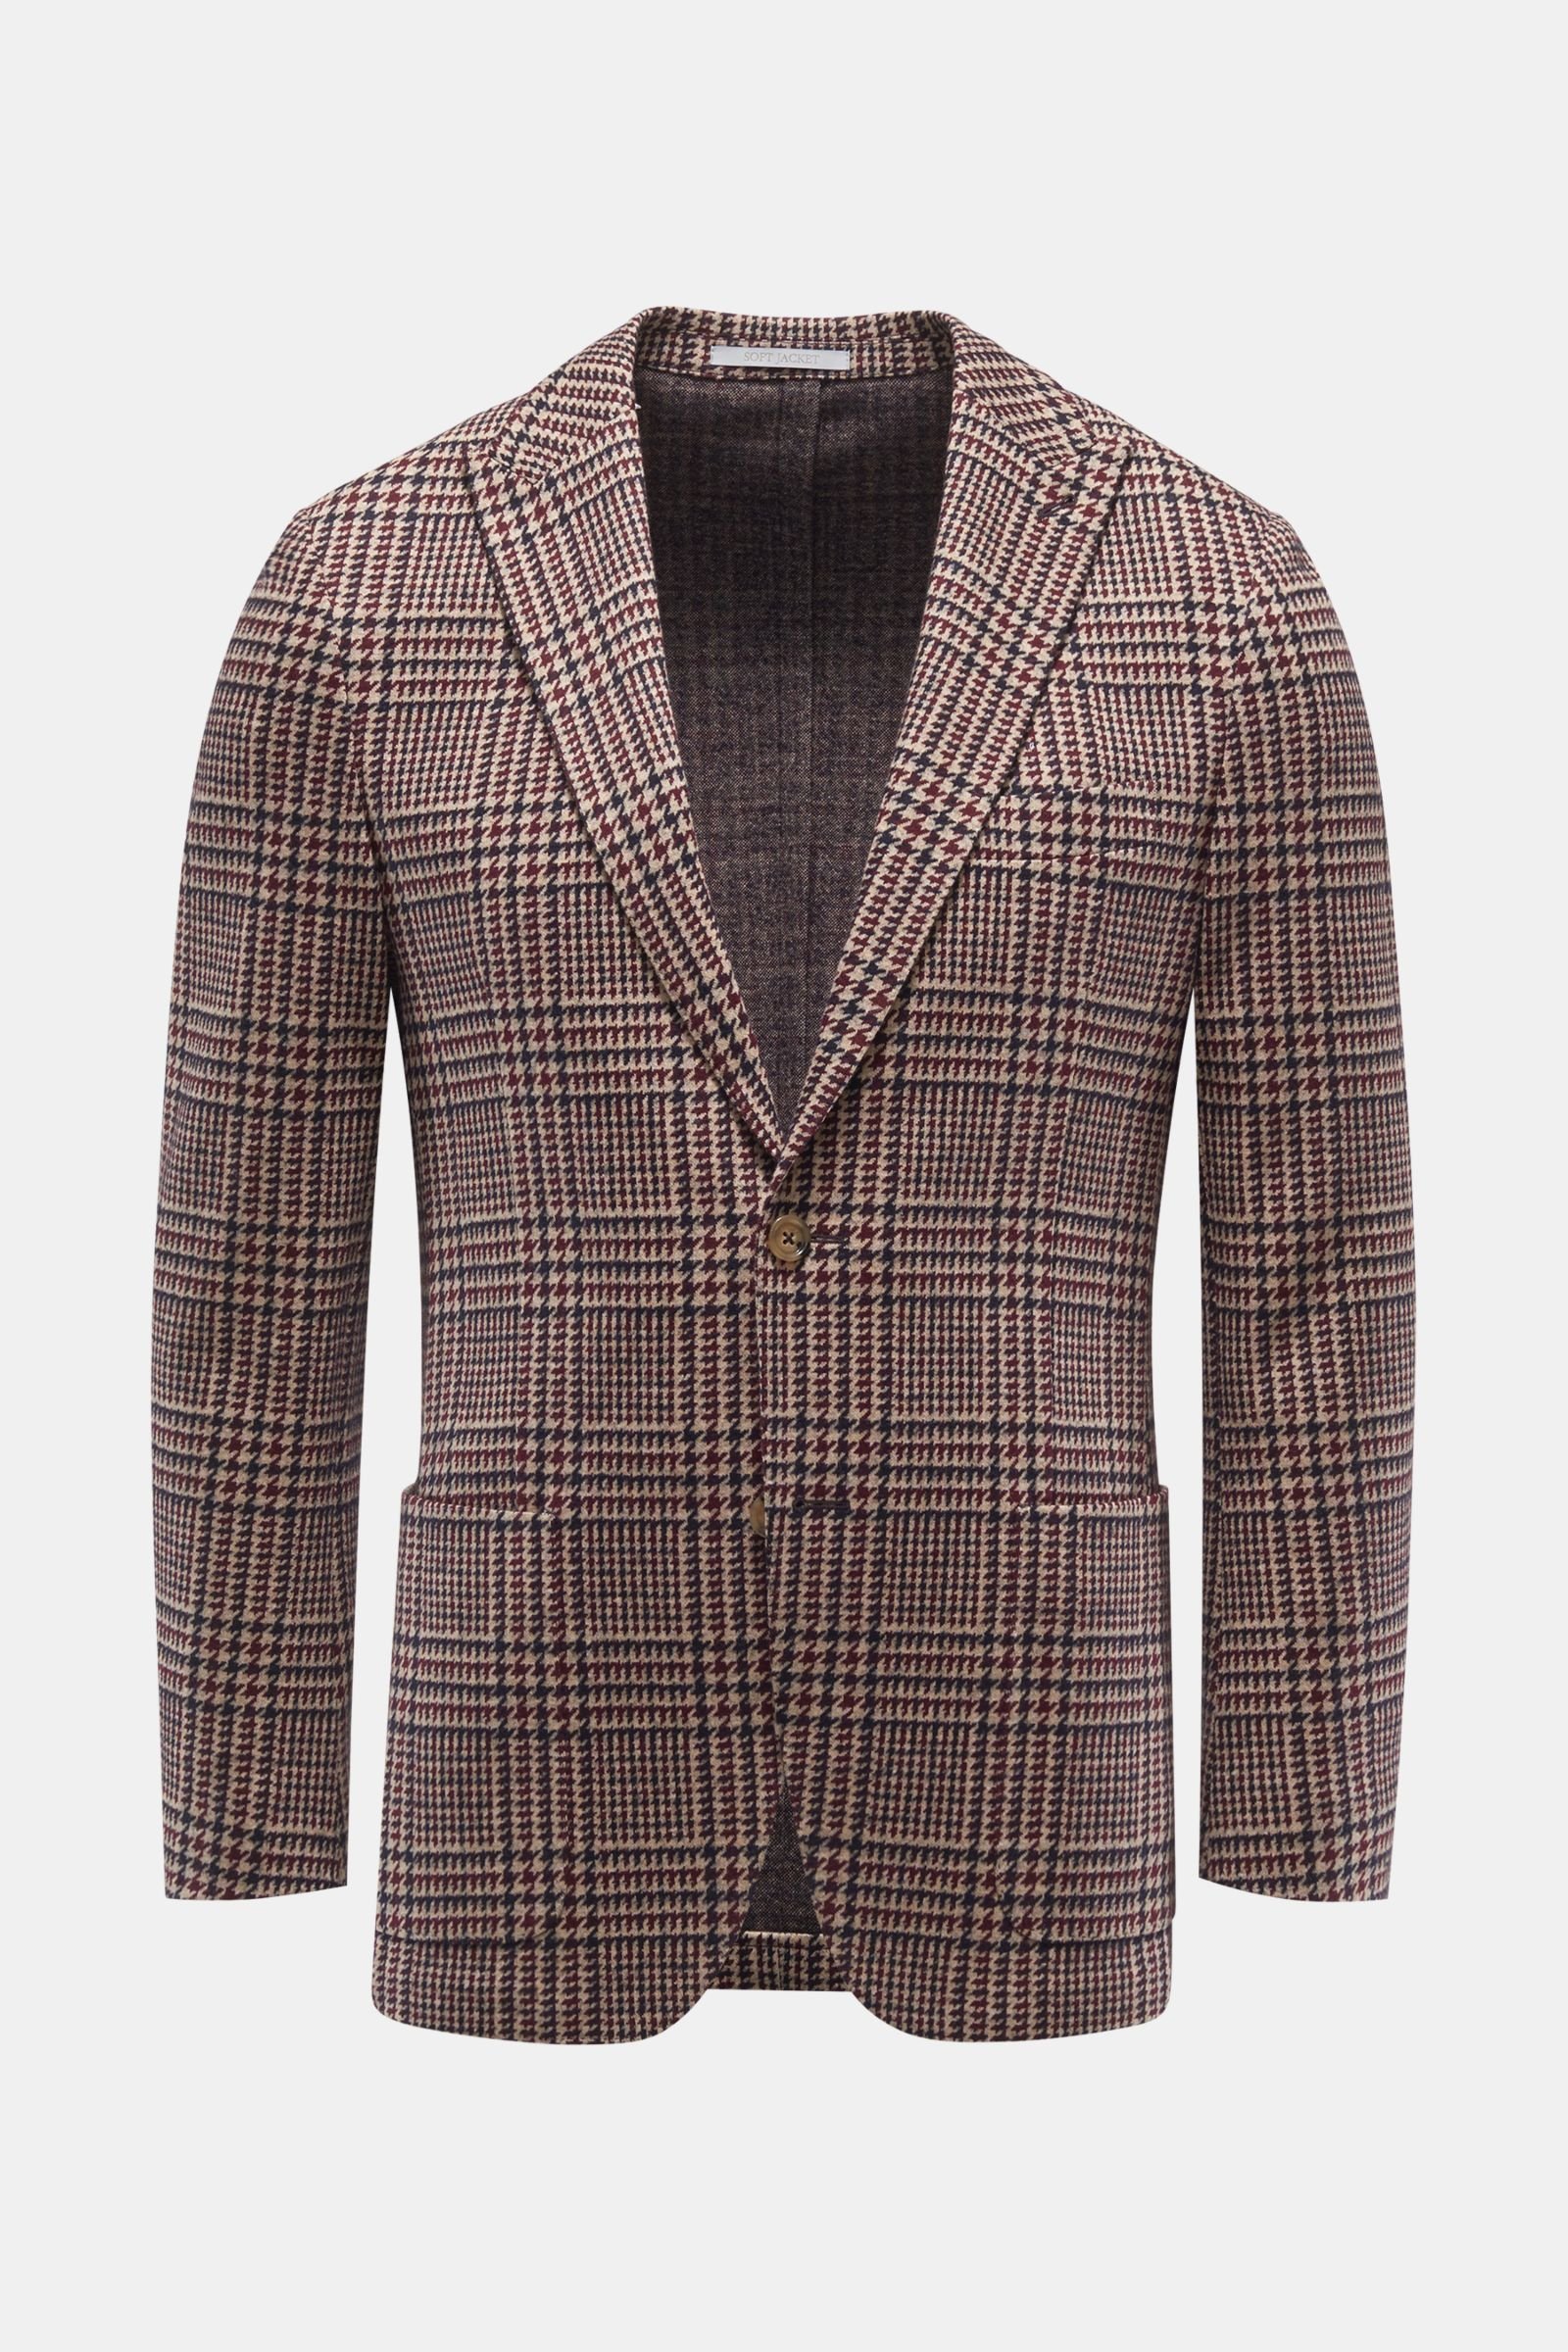 Jersey jacket light brown/burgundy checked